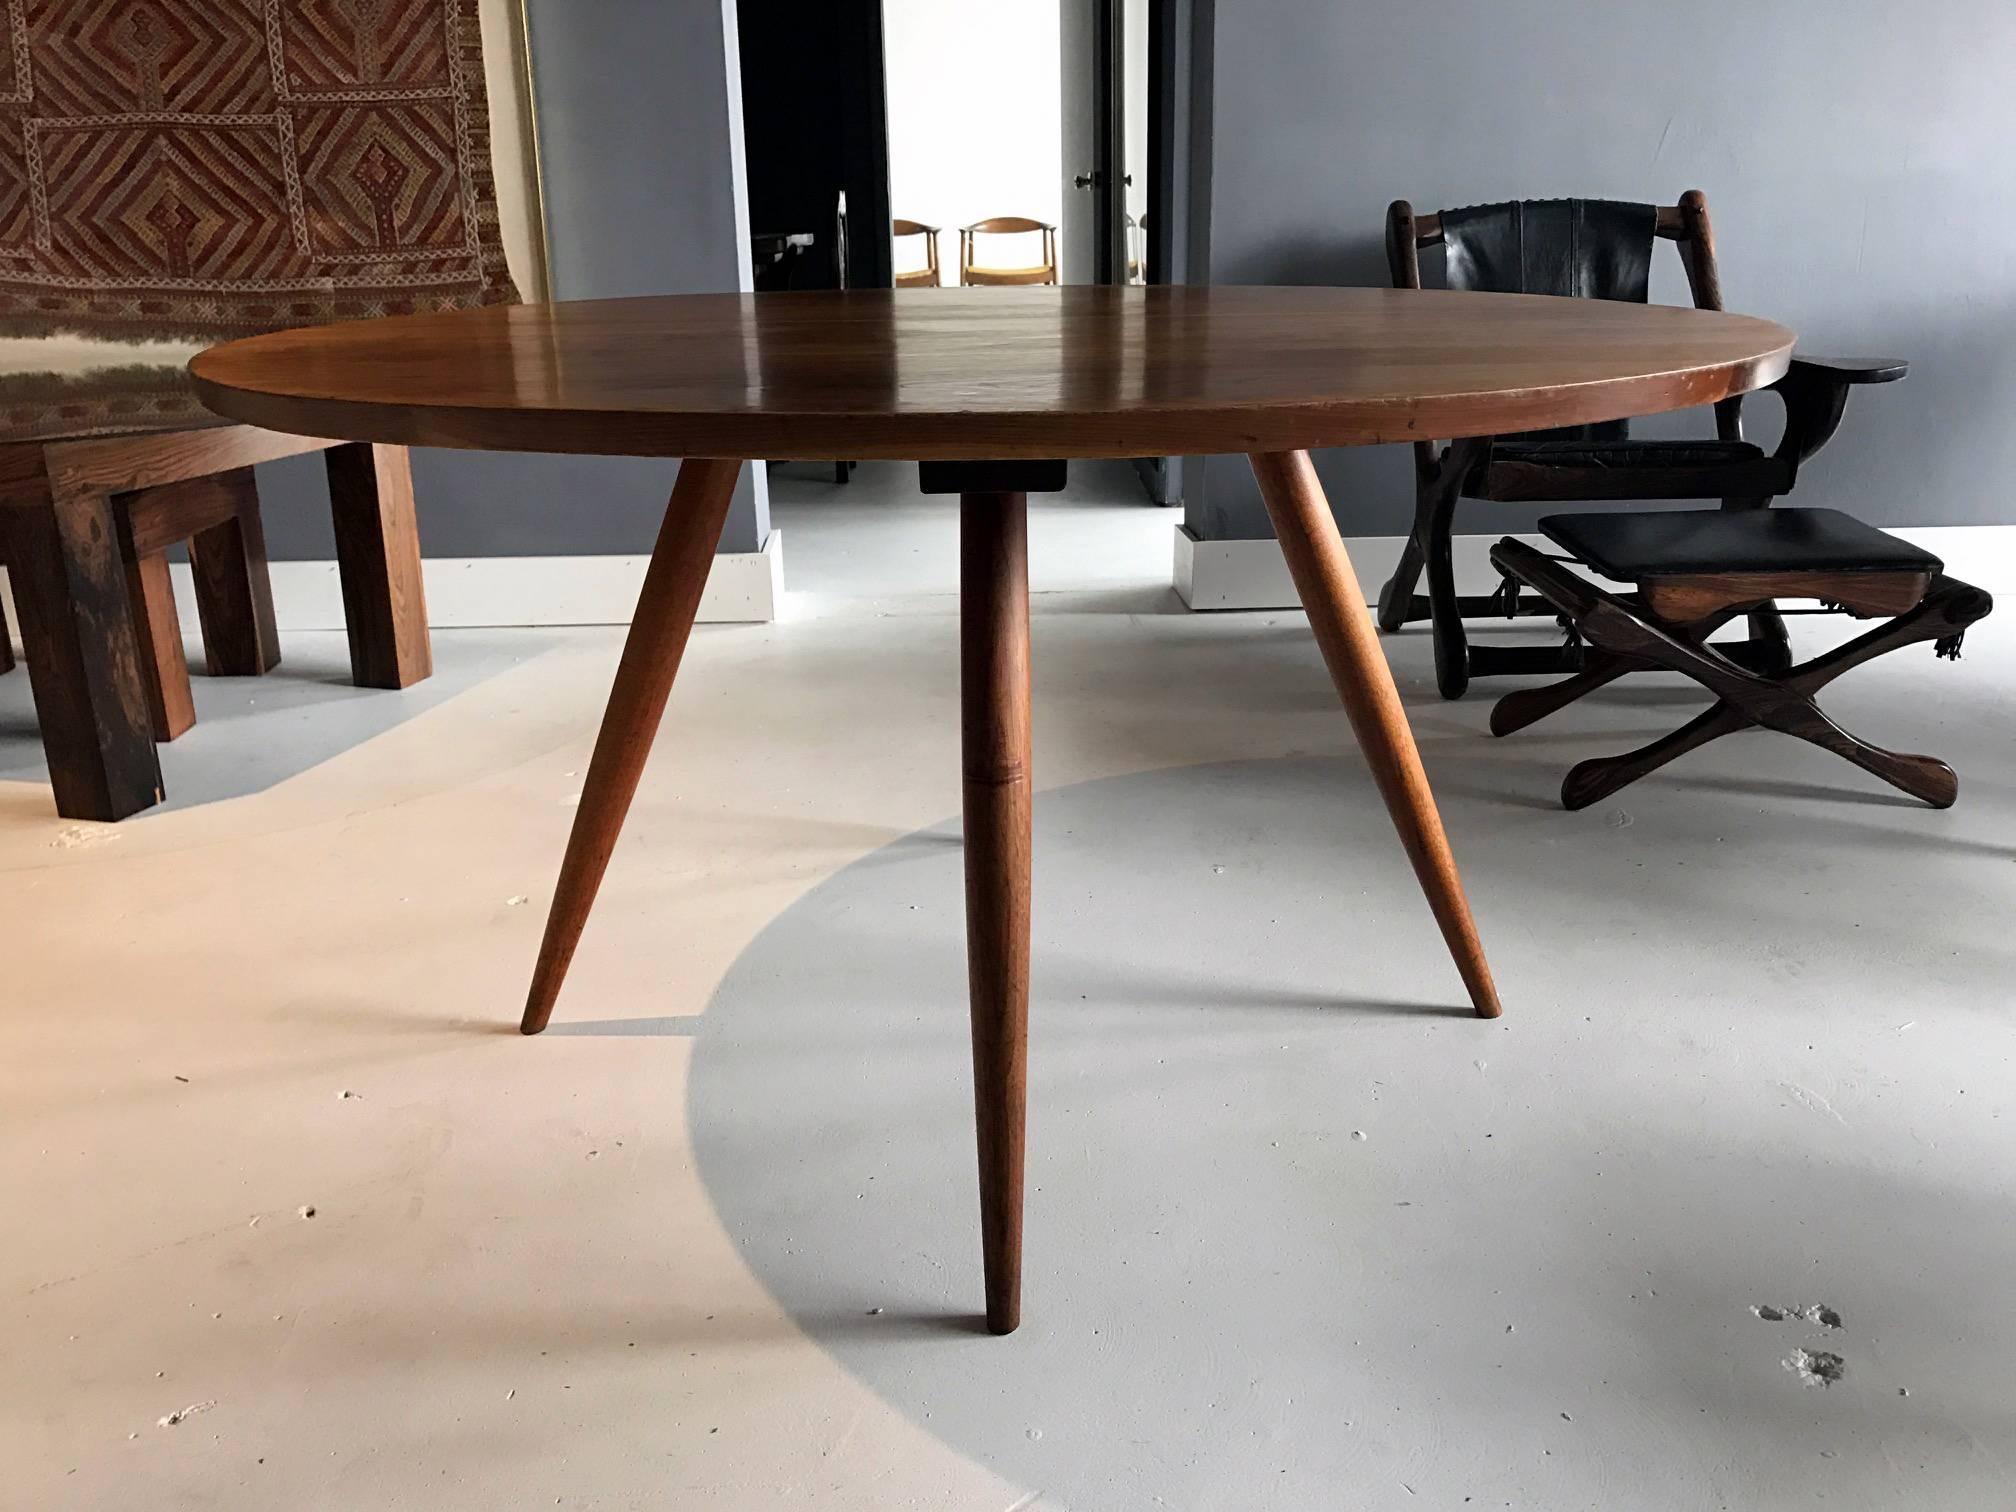 A circular dining table made from American walnut with spindle legs by George Nakashima, circa 1960s-1970s. Minimalism Mid-Century Shaker-like design that showcases woodwork based on traditional Japanese techniques. Residual pencil marks underneath